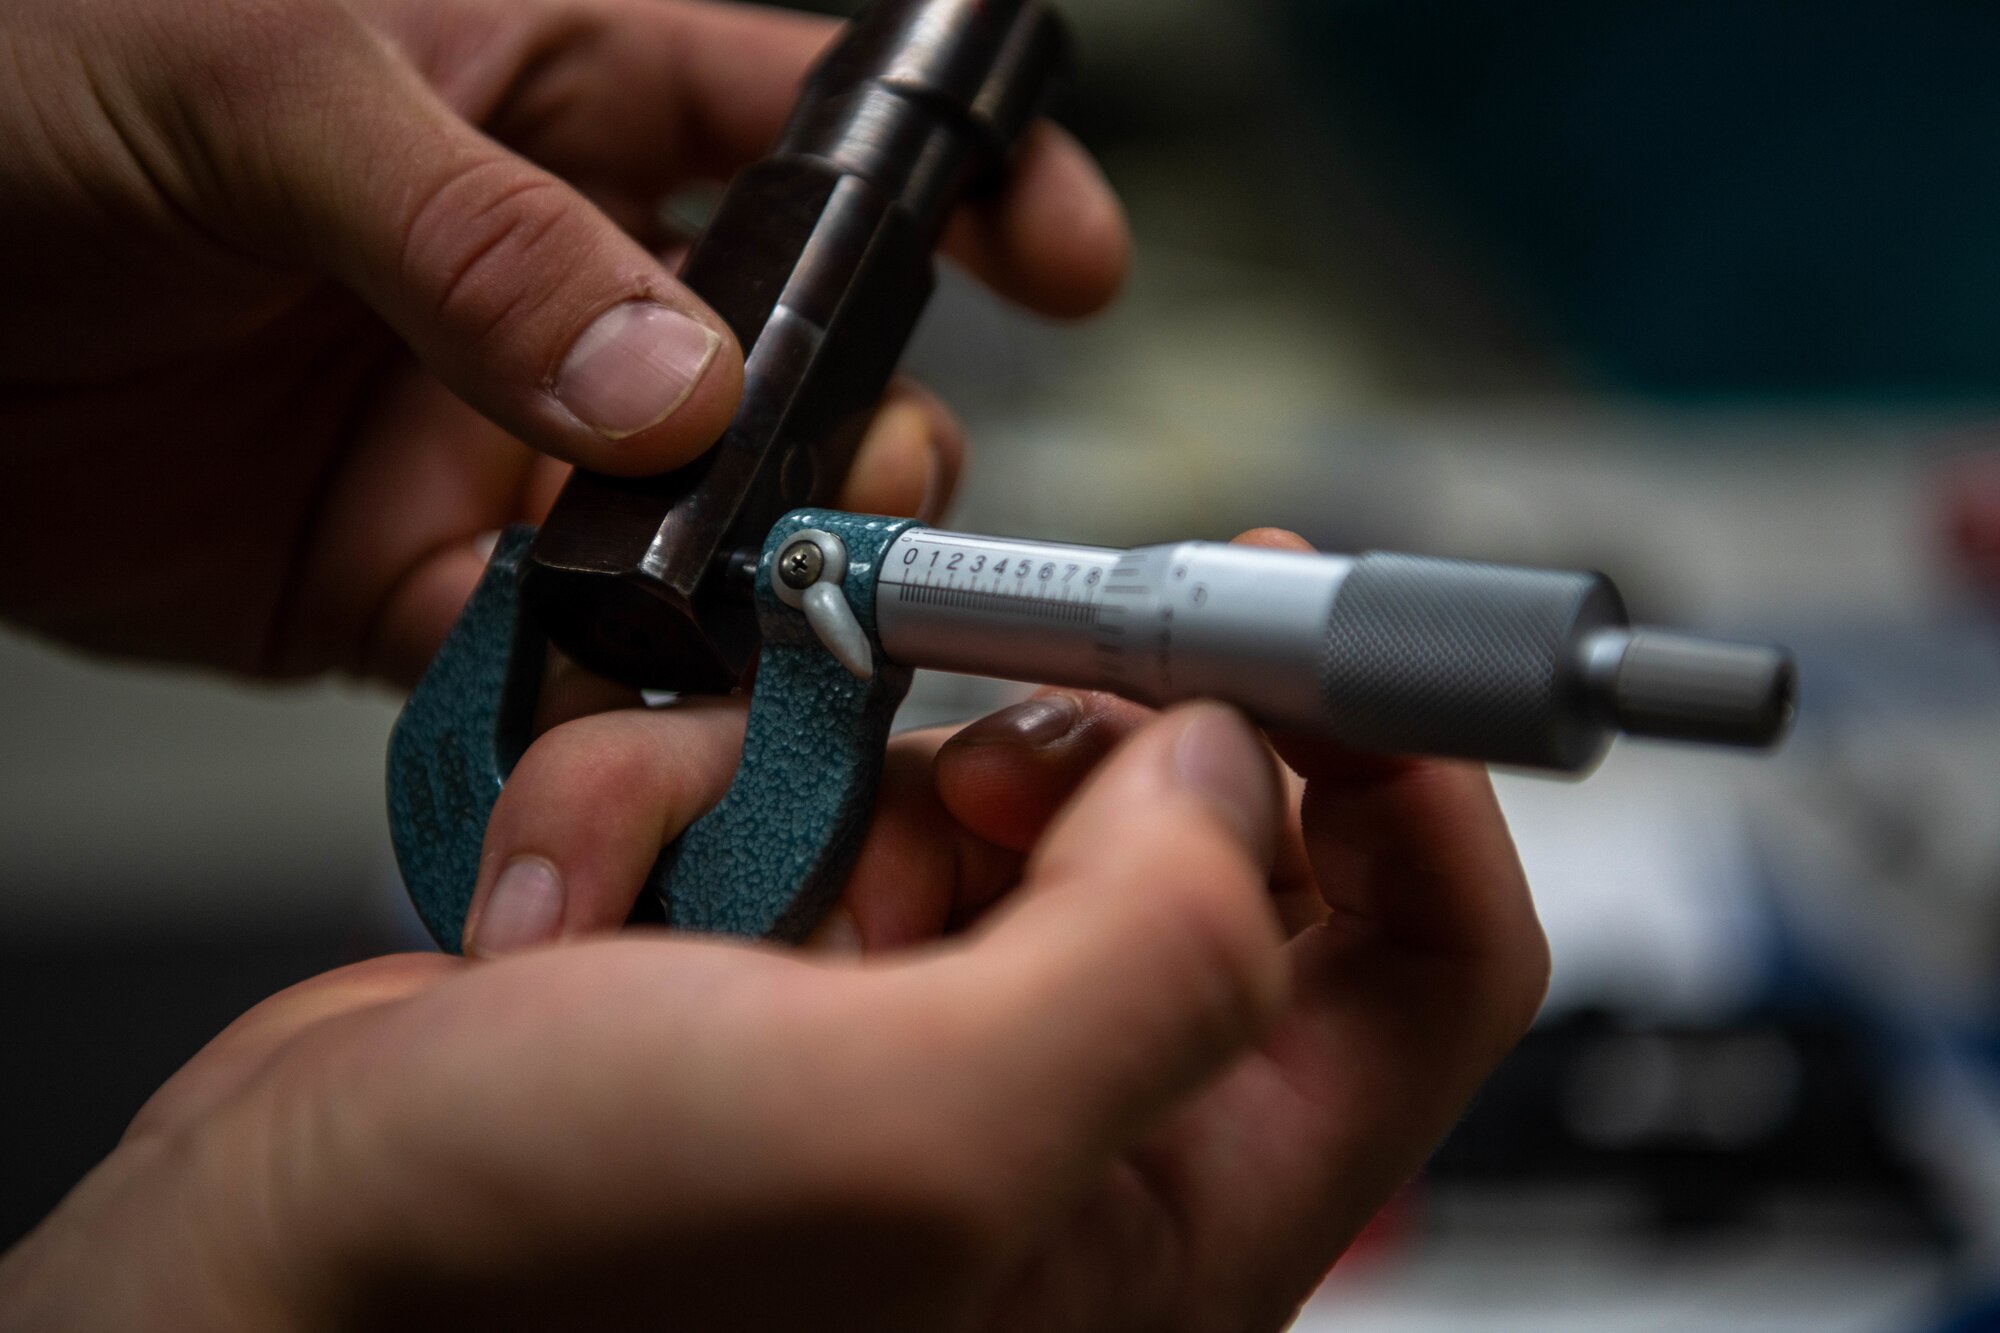 A close up shot of a micrometer tool being used to measure another metals technology tool.